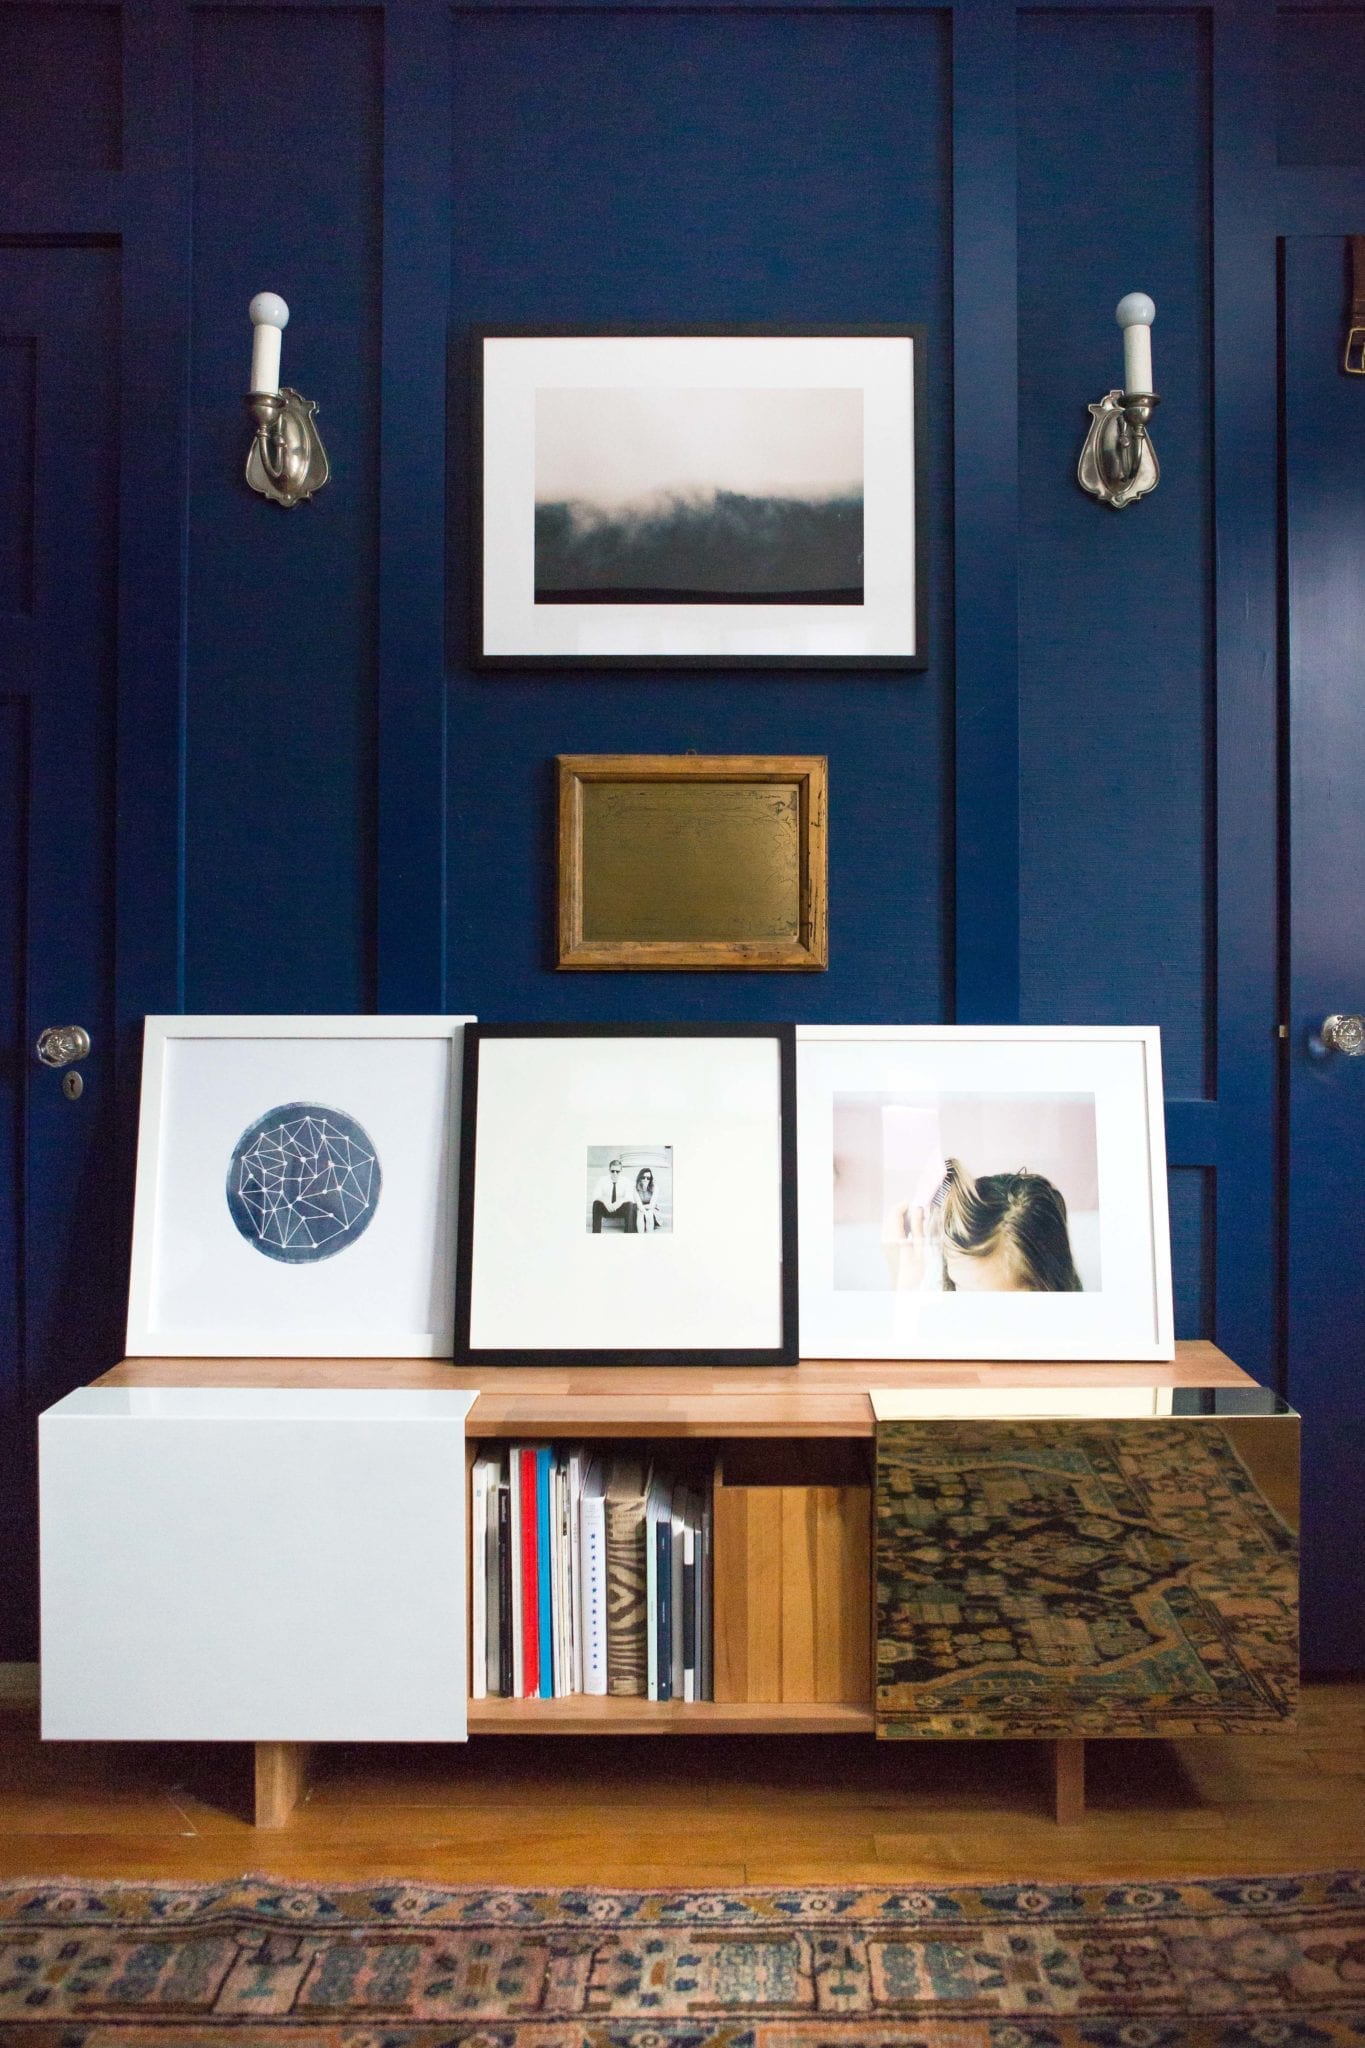 7 creative ways to display personal photos, art and souvenirs at home |  Wit & Delight